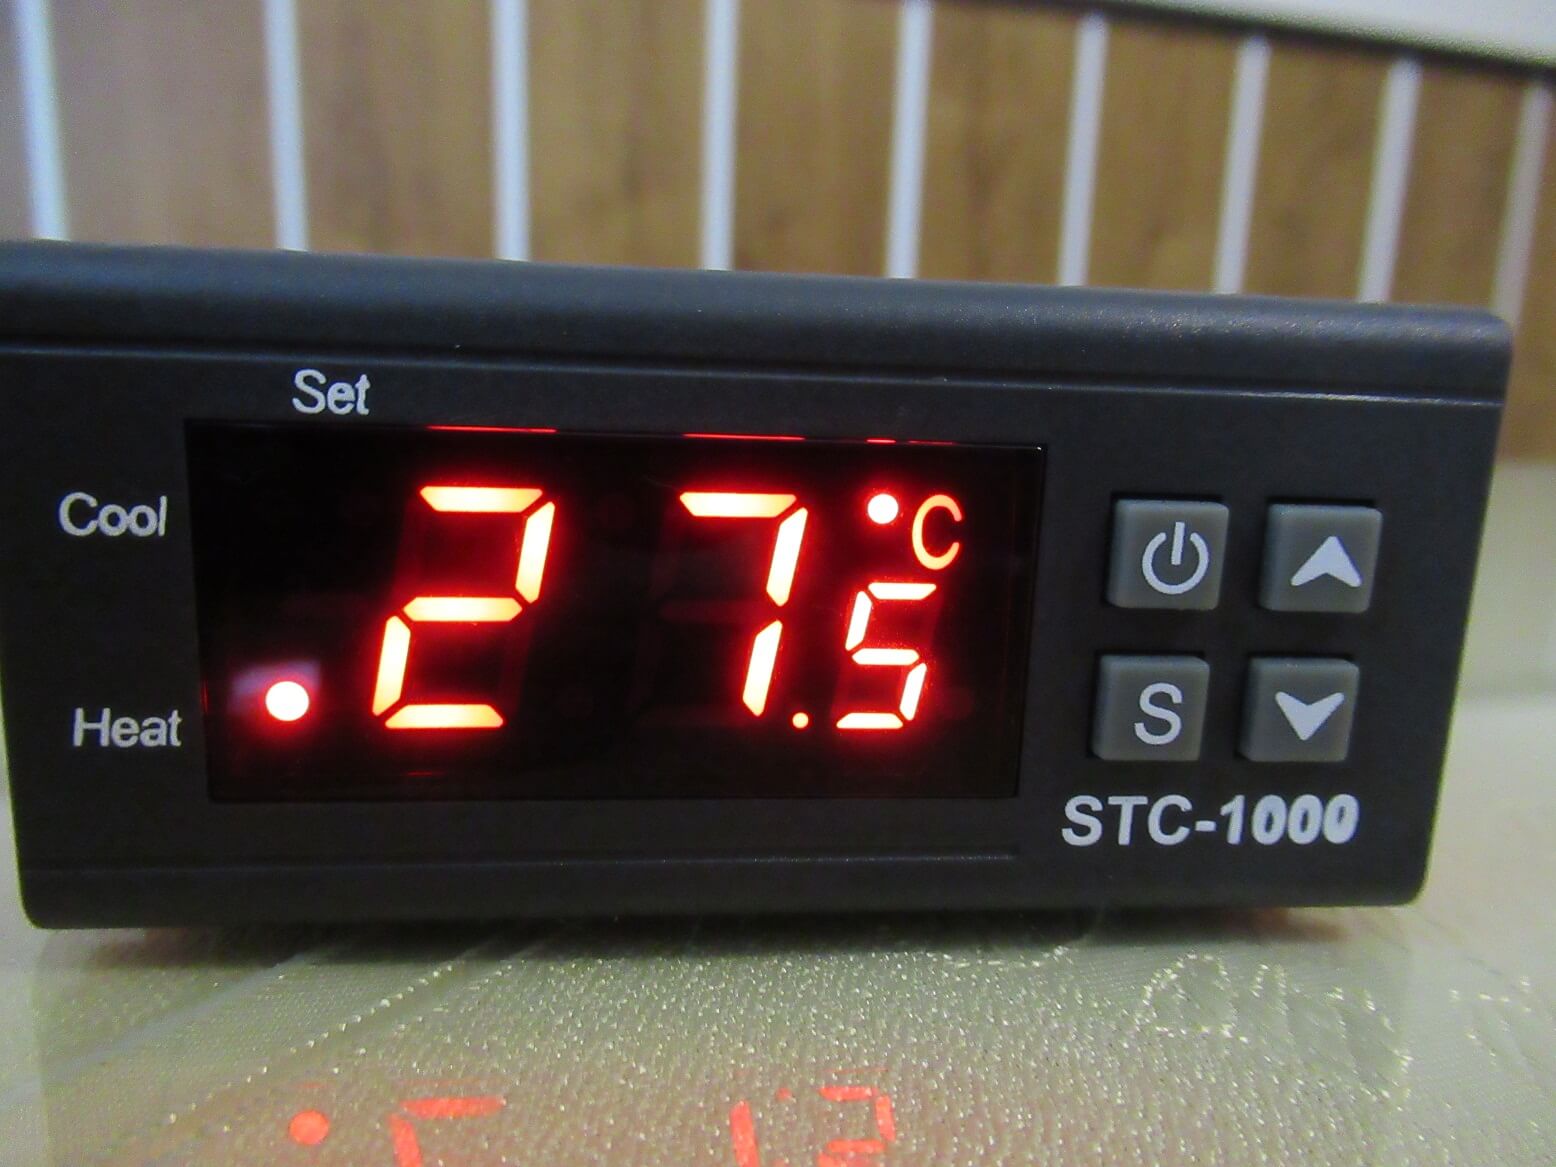 STC-1000 temperature controller 2x relay heating- cooling,review and manual